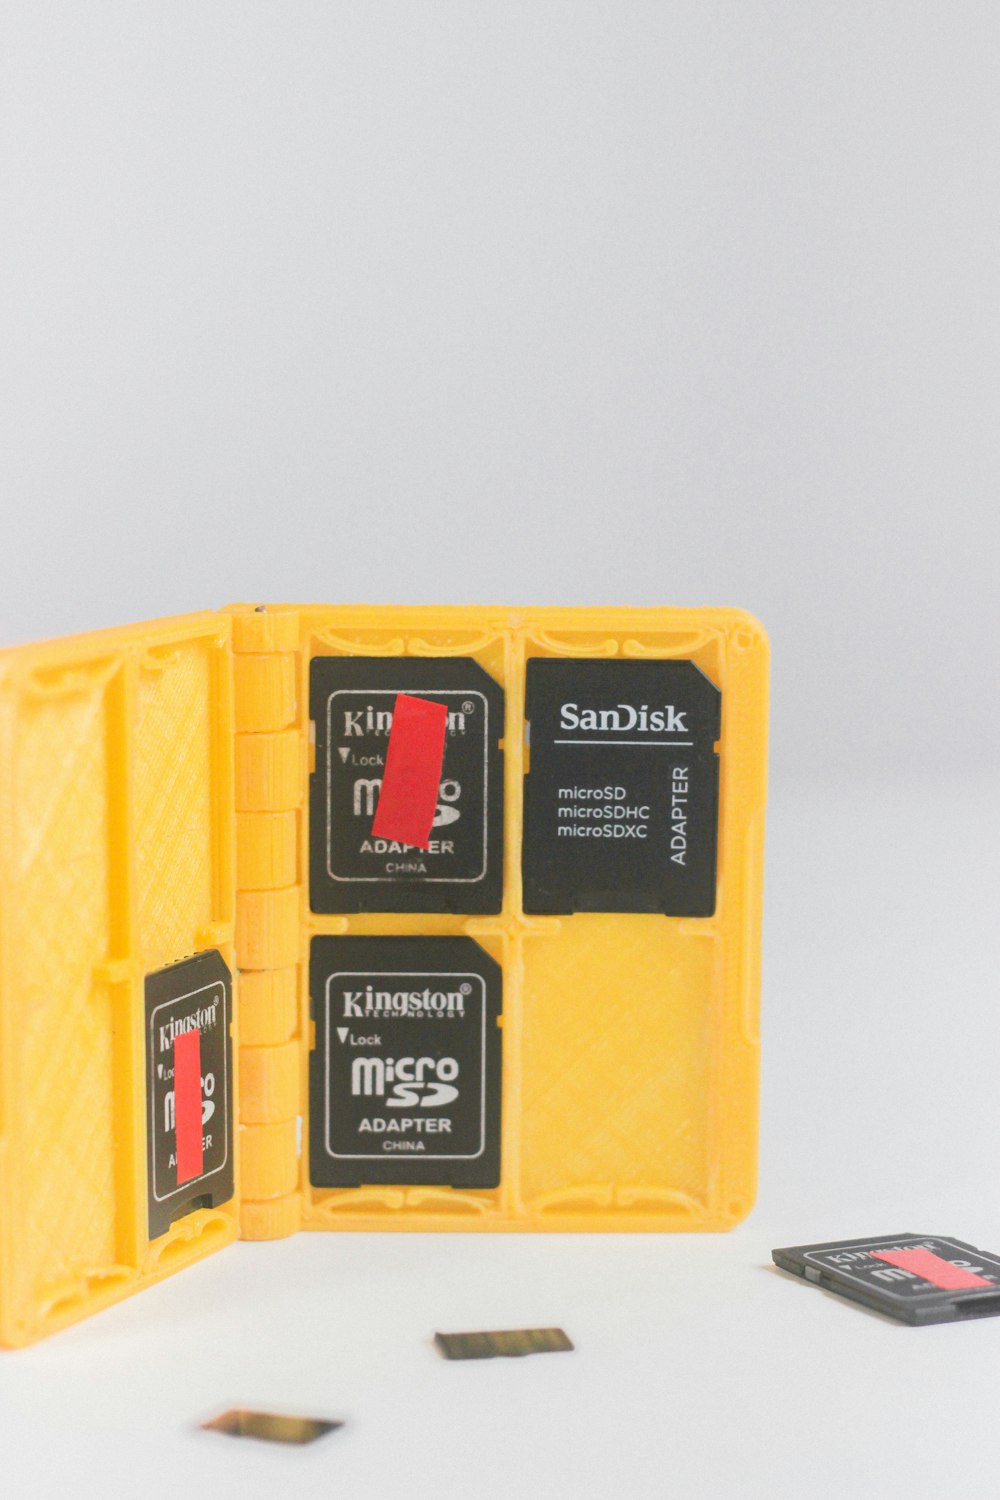 a yellow box with a black label